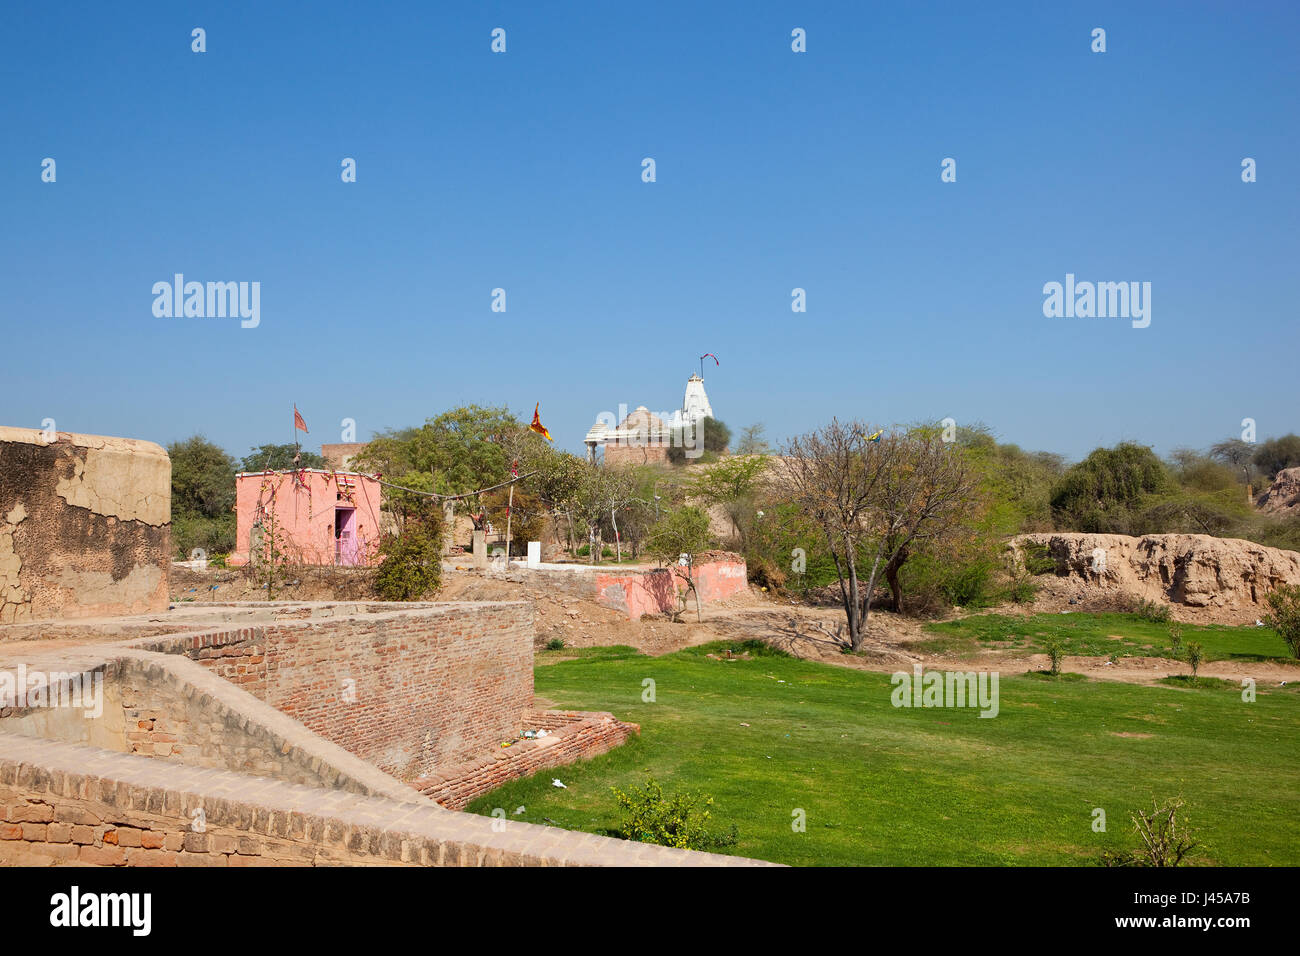 the top of bhatner fort with a hindu temple and grounds currently under restoration work in the city of hanumangarh rajasthan india under a blue sky i Stock Photo